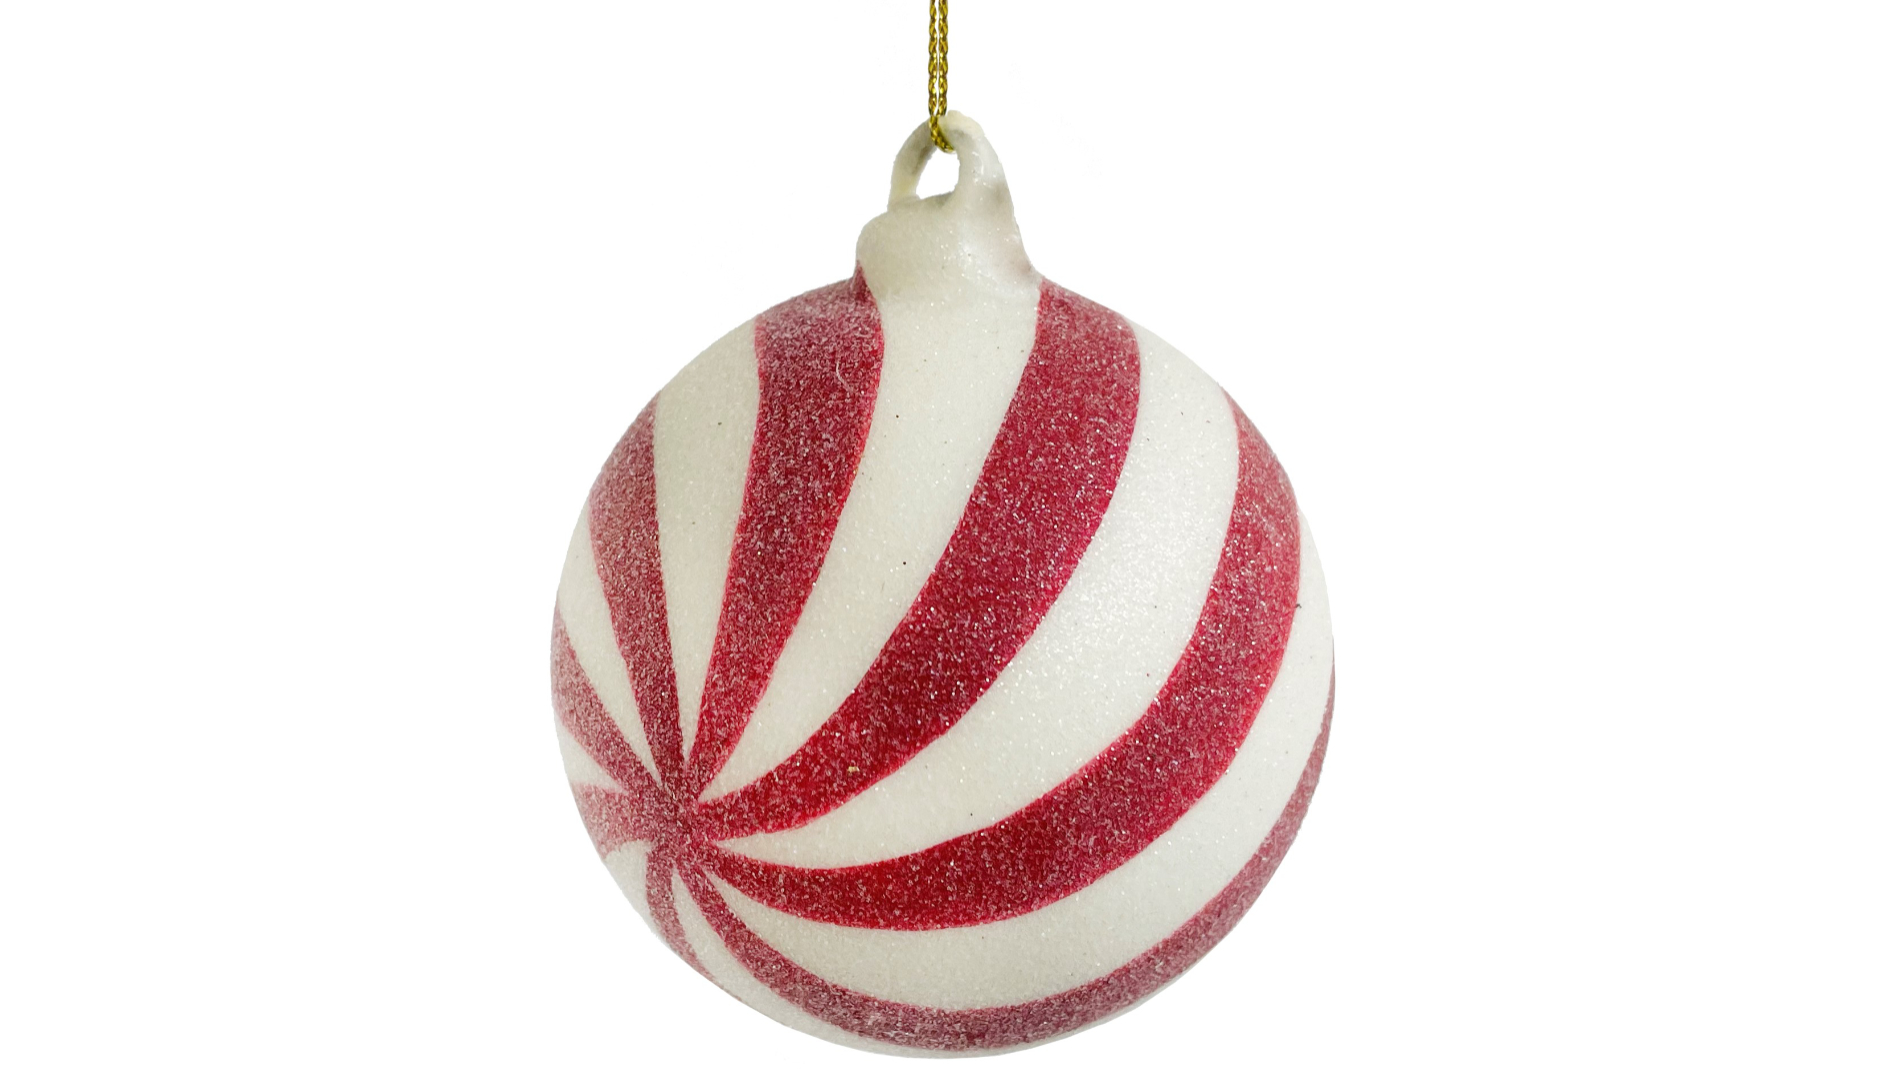 Decorative baubles in striking red and white also set cheerful accents in summer and autumn. Photo: Shishi